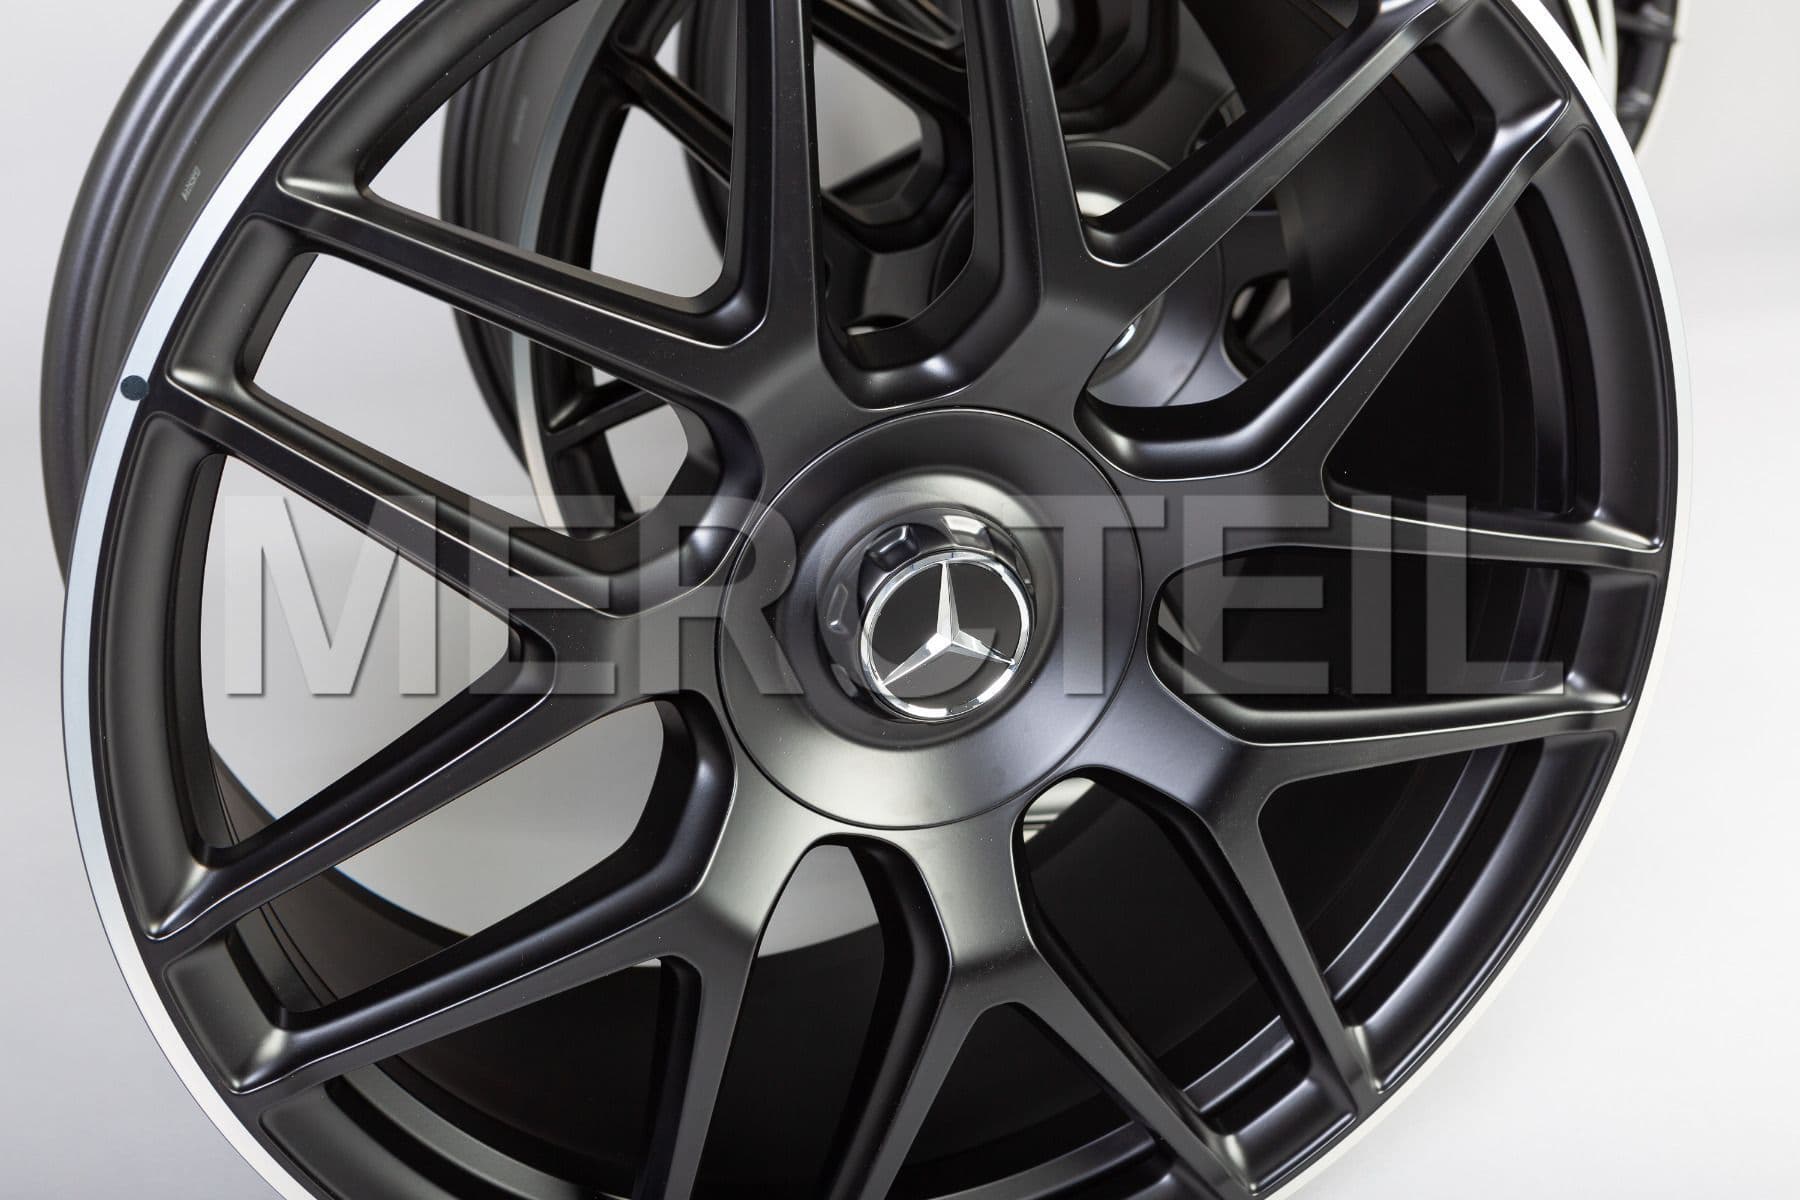 E63 AMG Rims Forged Black 20 Inch W213 Genuine Mercedes Benz (part number A21340130007X71)